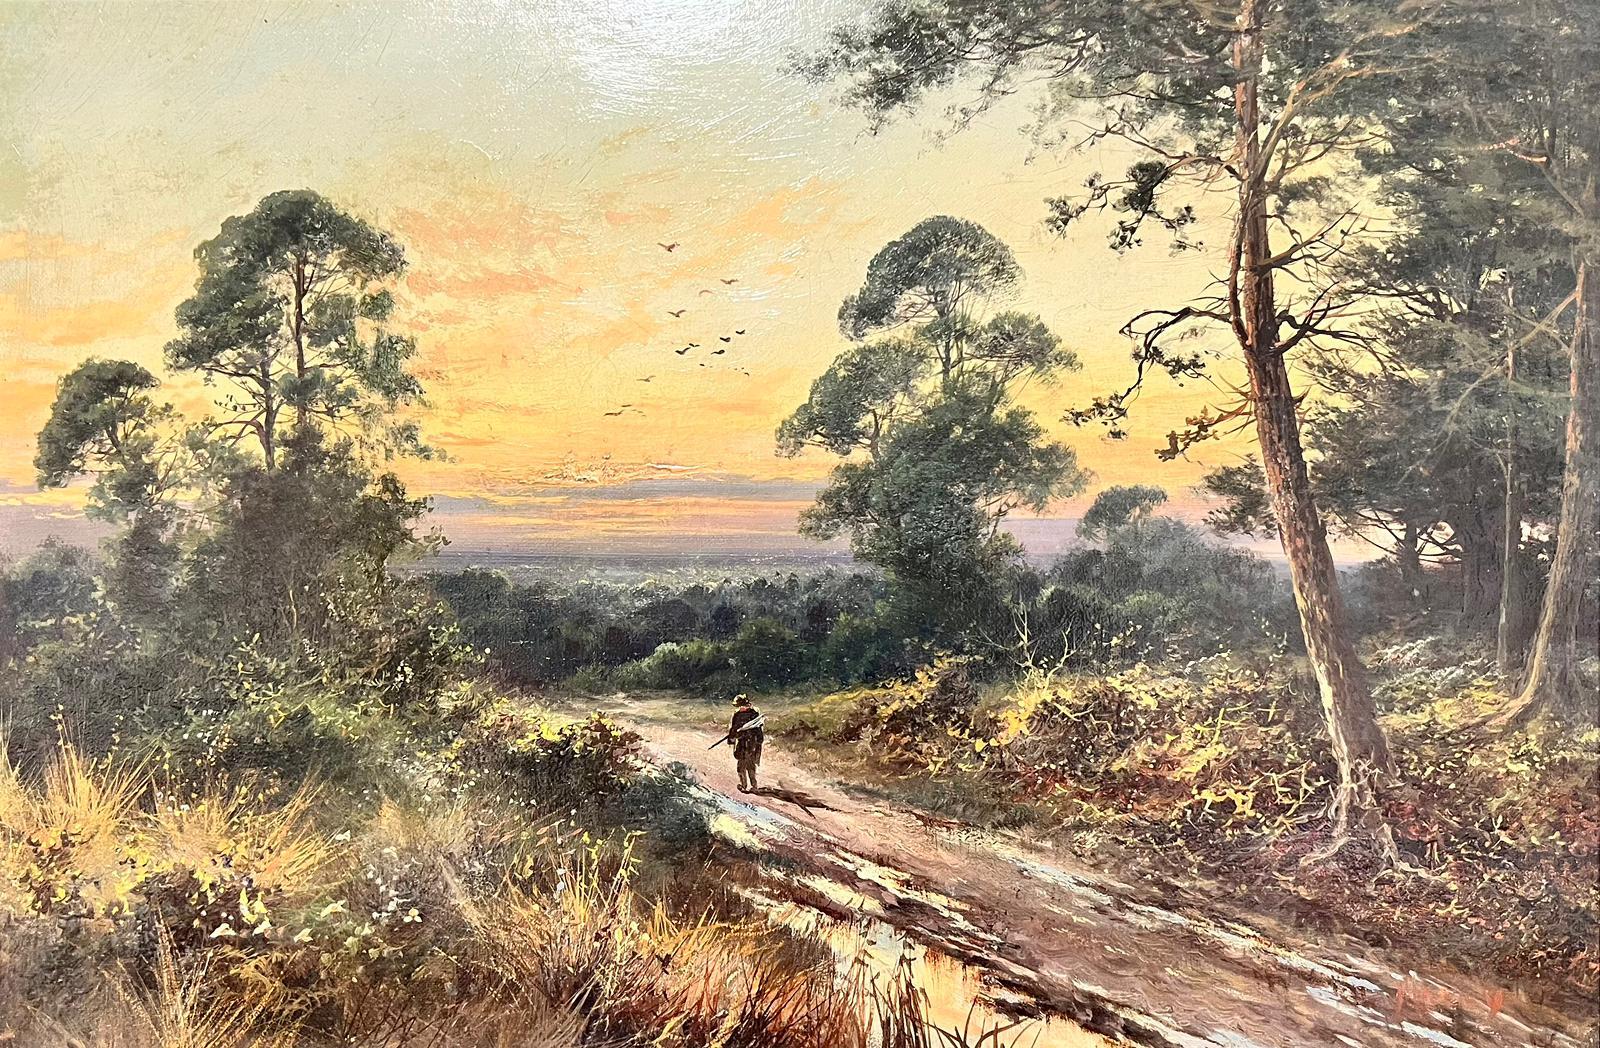 The Close of Day
British School, late 19th century
signed, 'Harvey'
oil painting on canvas, framed
framed: 19 x 27 inches
canvas: 16 x 24 inches
provenance: private collection, UK
condition: very good and sound condition 
